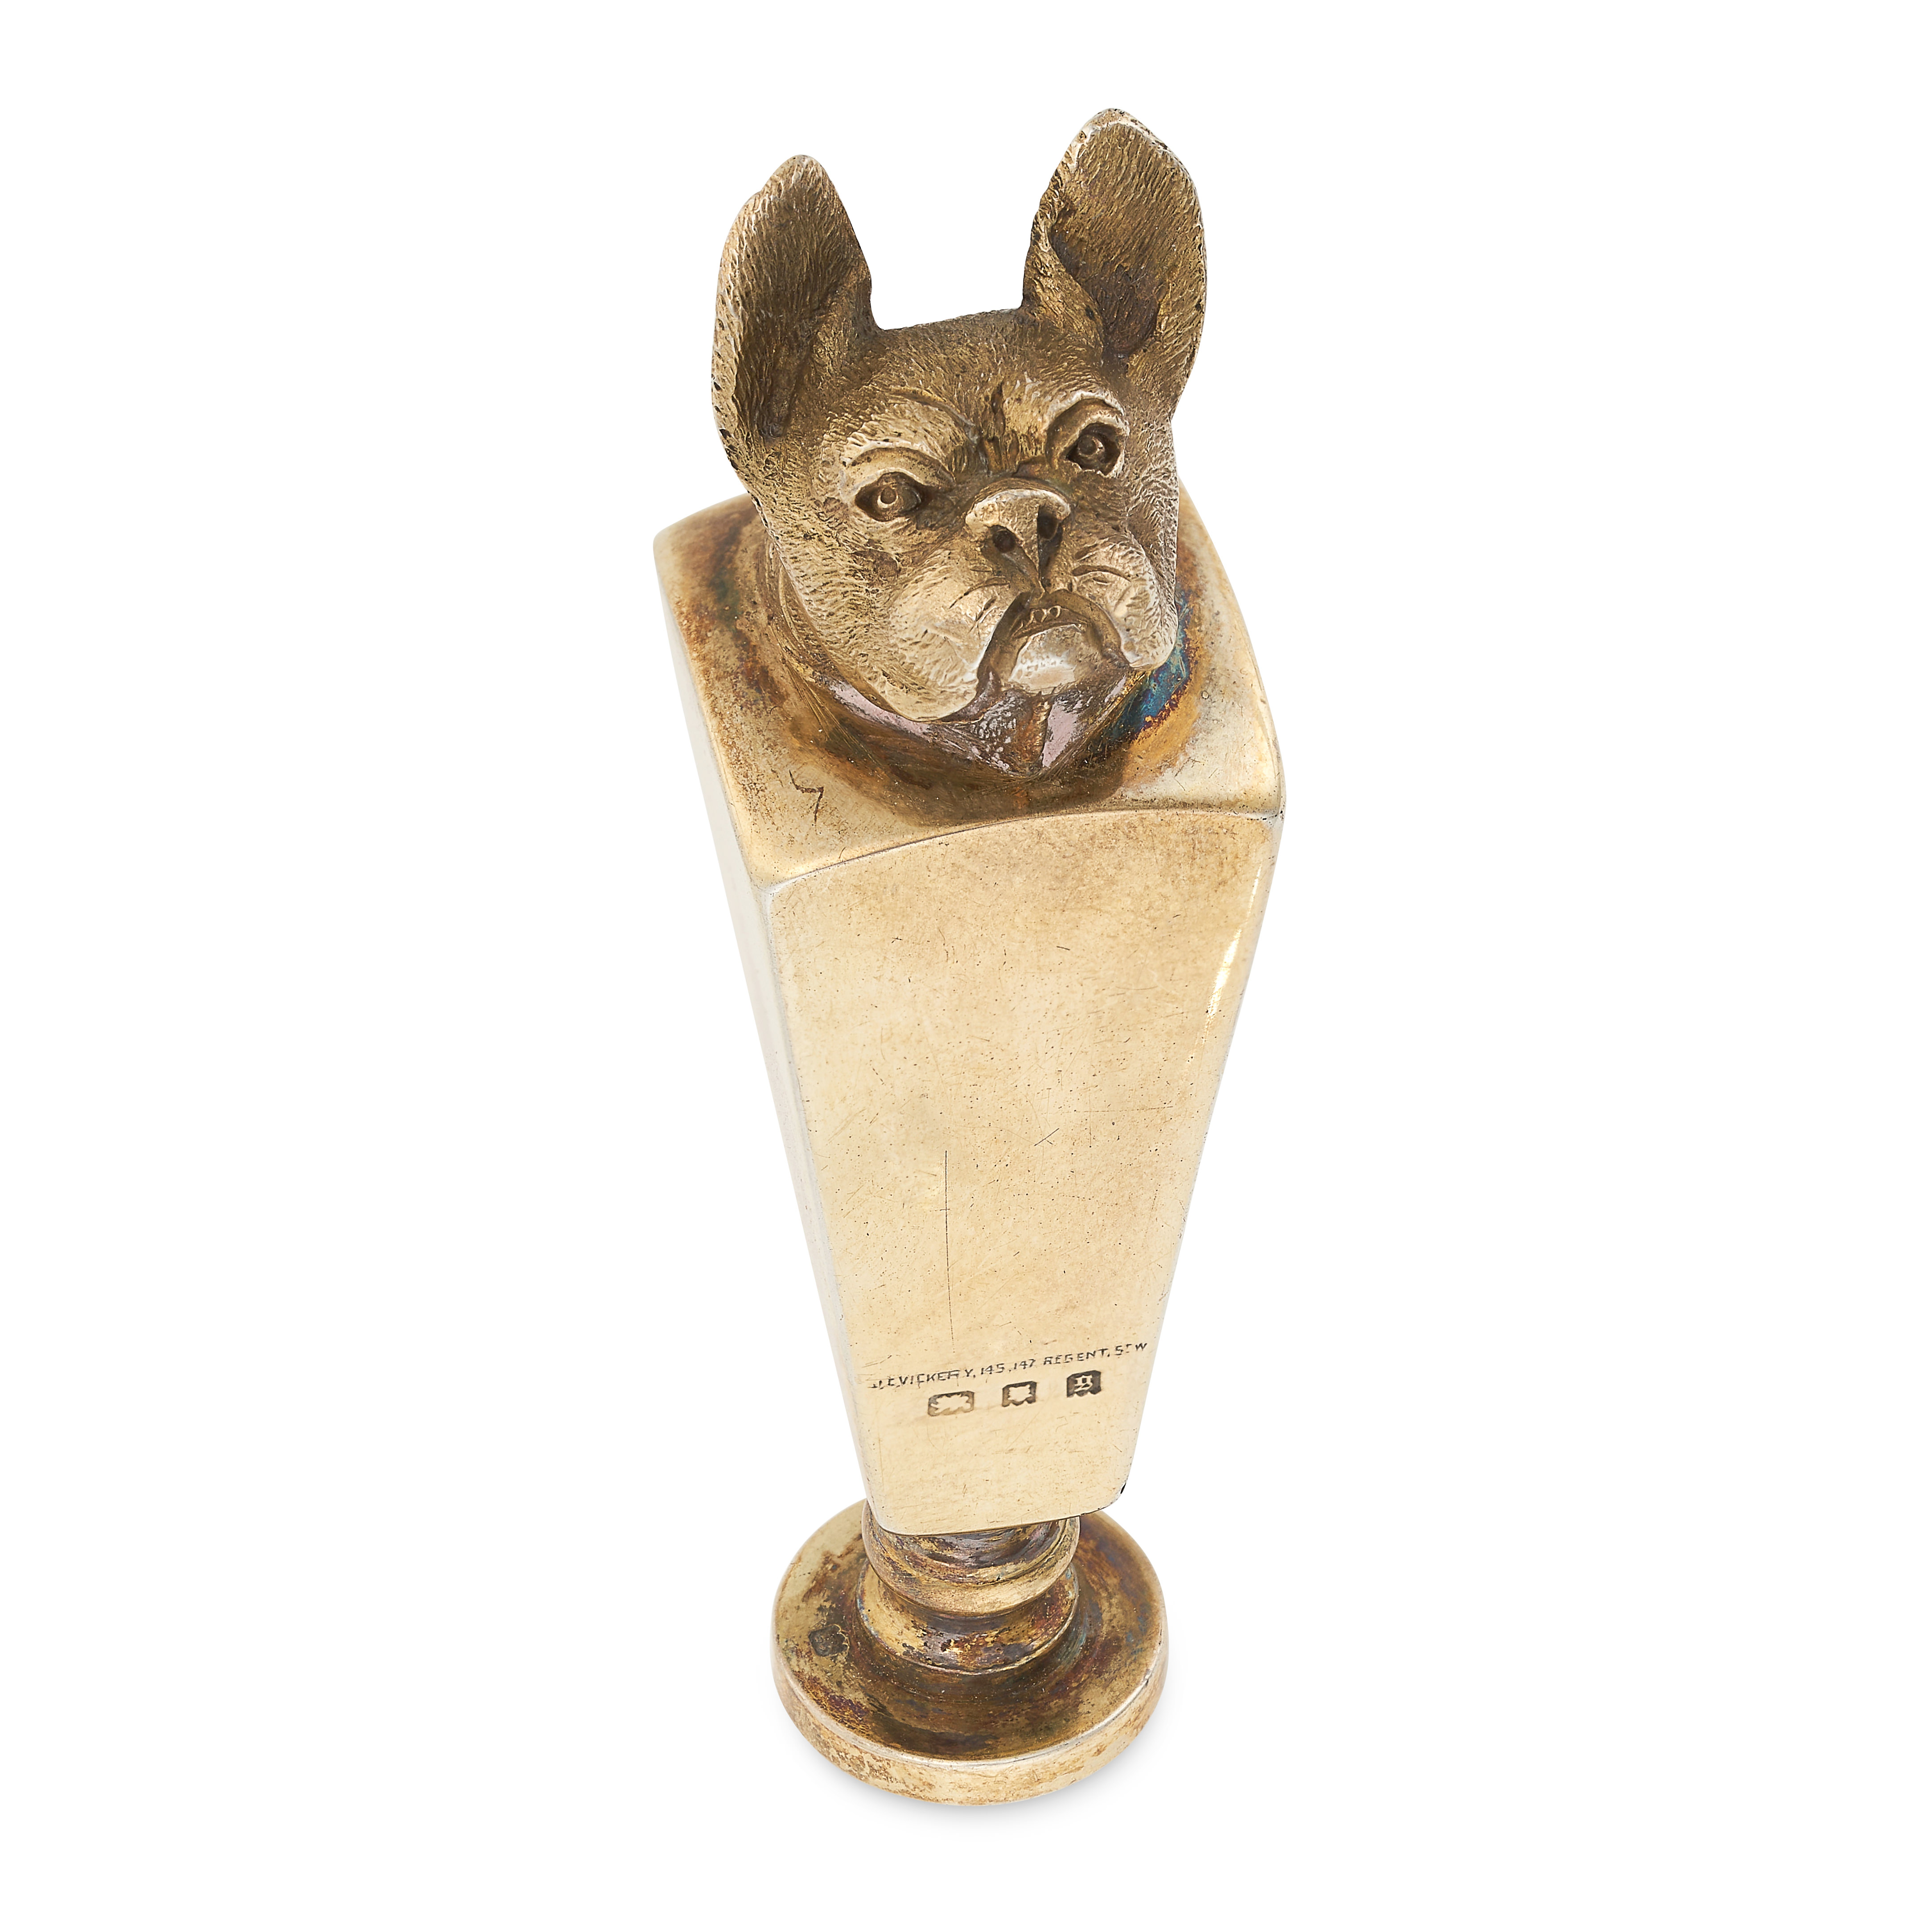 NO RESERVE - J C VICKERY, AN ANTIQUE FRENCH BULLDOG HAND SEAL, 1922 in gilded silver, with the crest